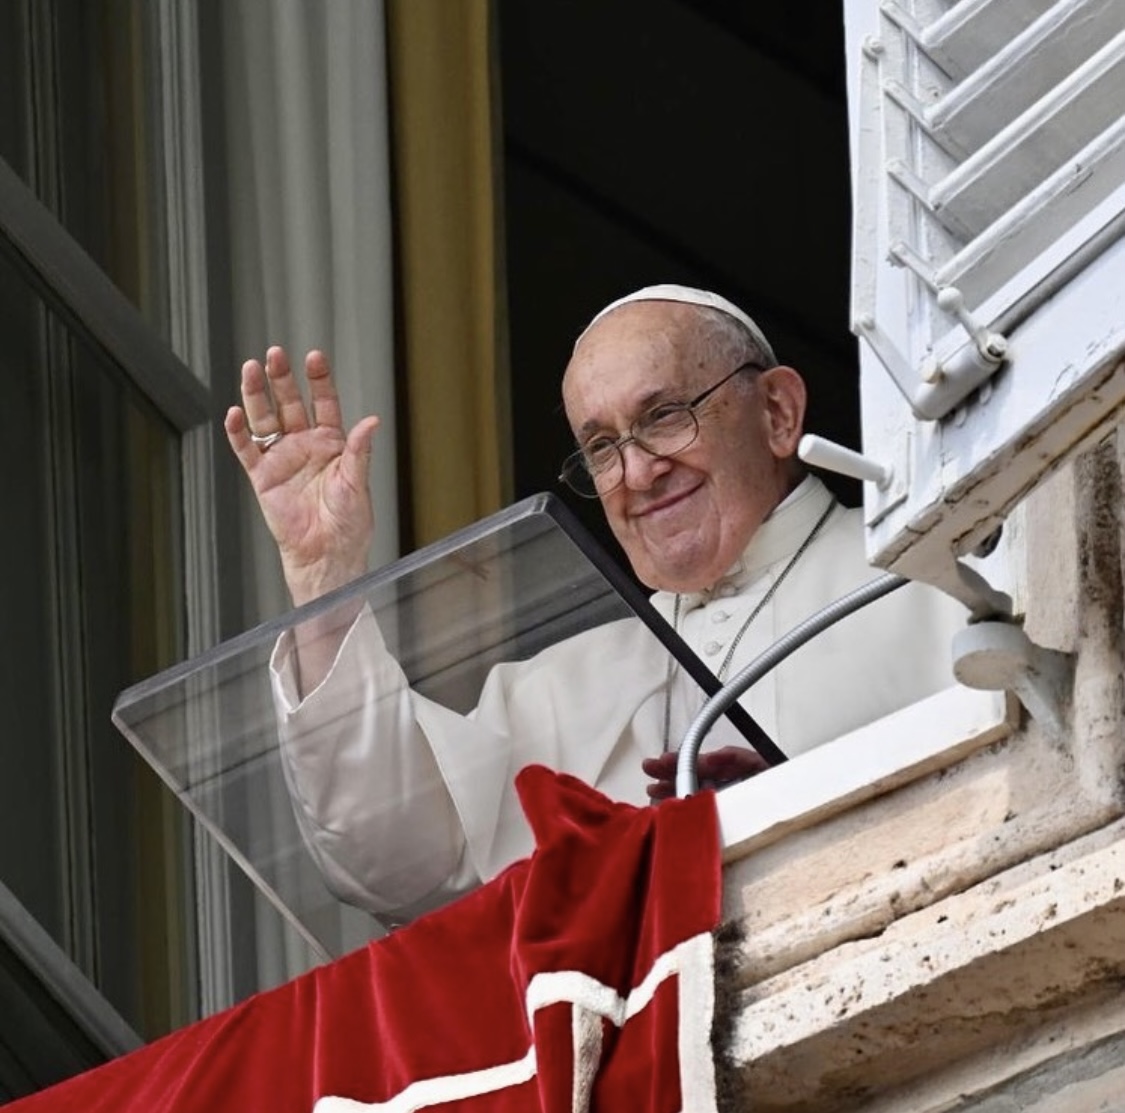 On+Oct.+4%2C+Pope+Francis+issued+%E2%80%9CLaudate+Deum%2C%E2%80%9D+an+Apostolic+Exhortation+building+on+his+2015+encyclical+letter+%E2%80%9CLaudato+Si%E2%80%99.%E2%80%9D+%28Courtesy+of+Instagram%29